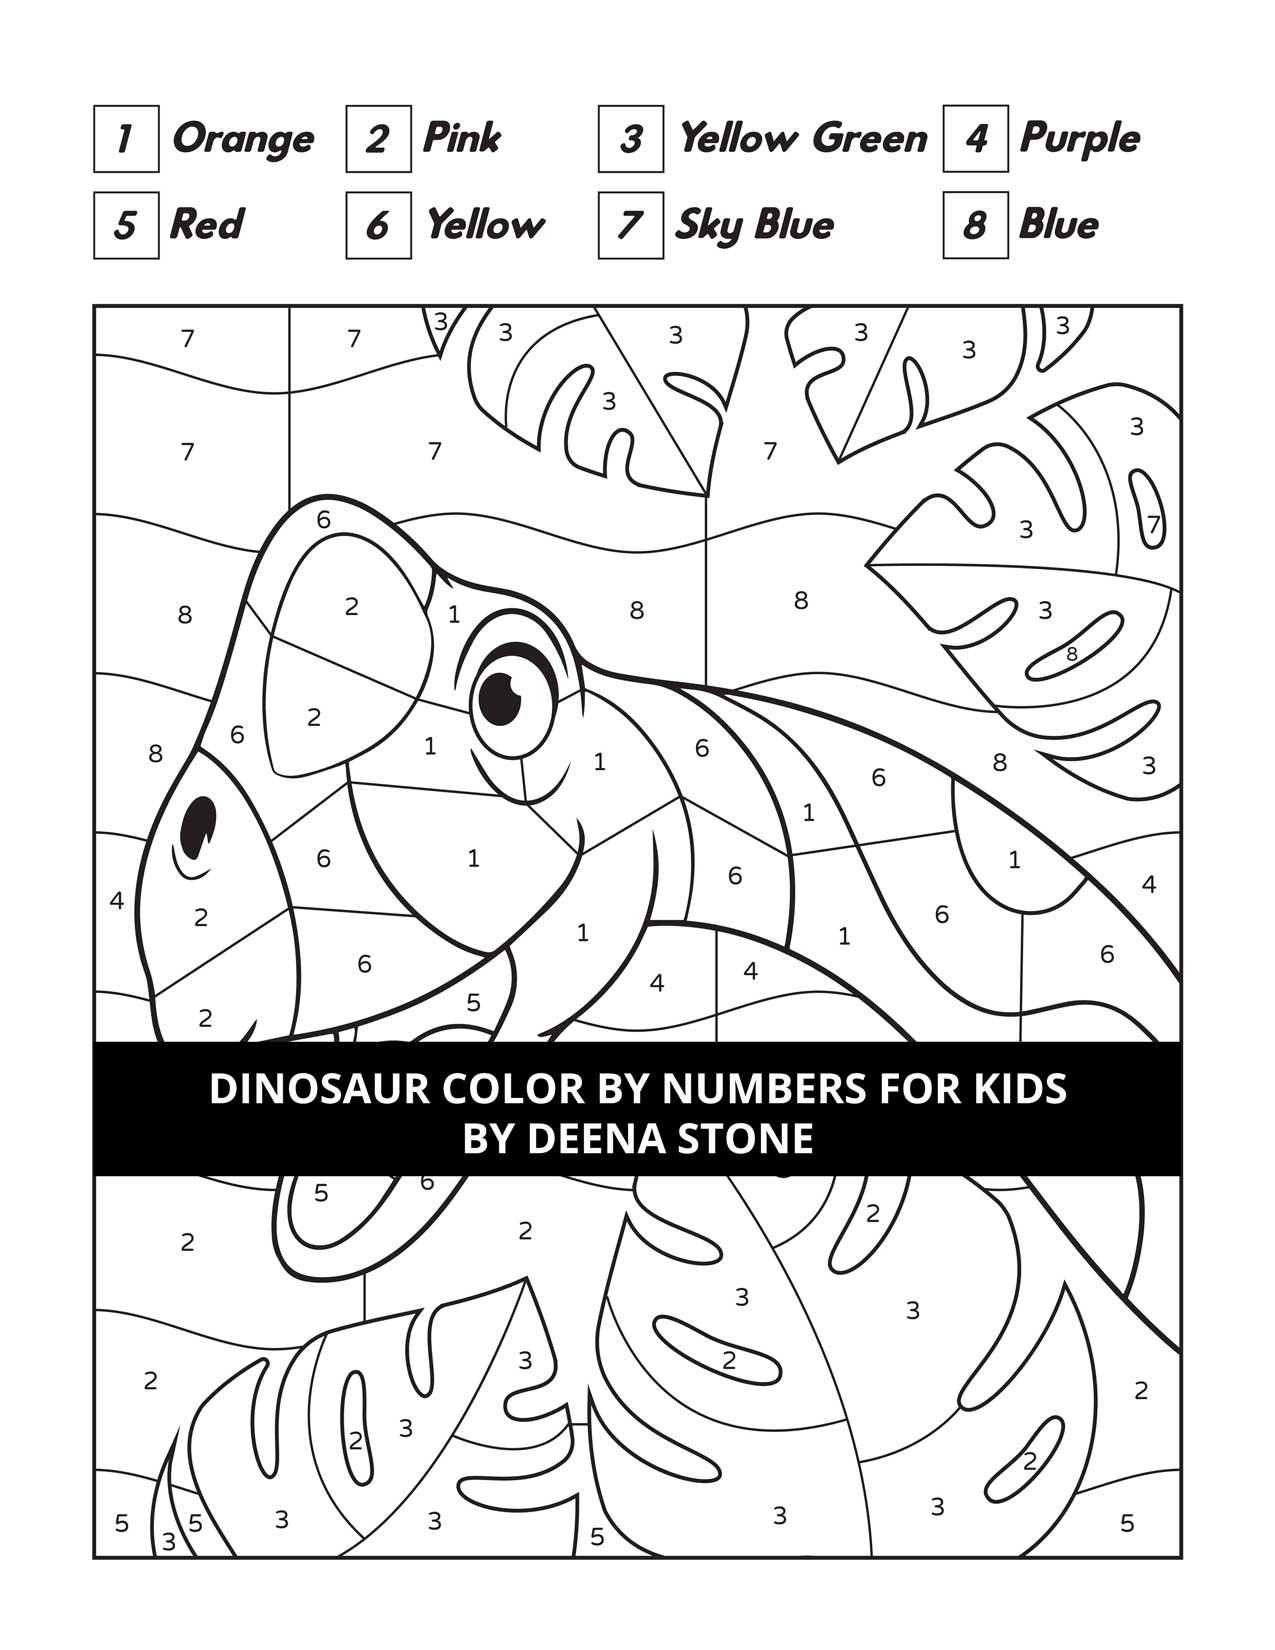 Dinosaur Color By Numbers For Kids - Deena Stone